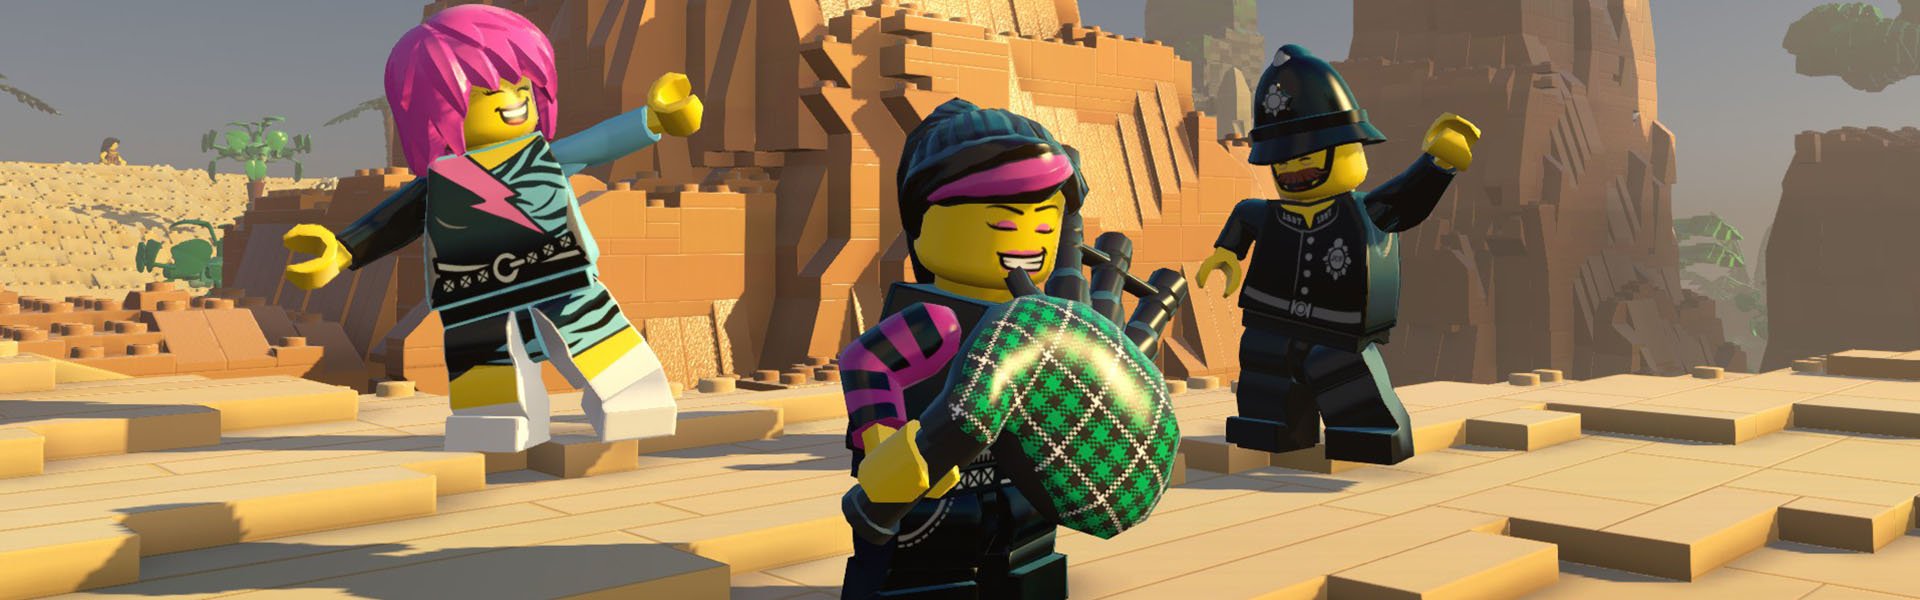 Lego Worlds Review 12